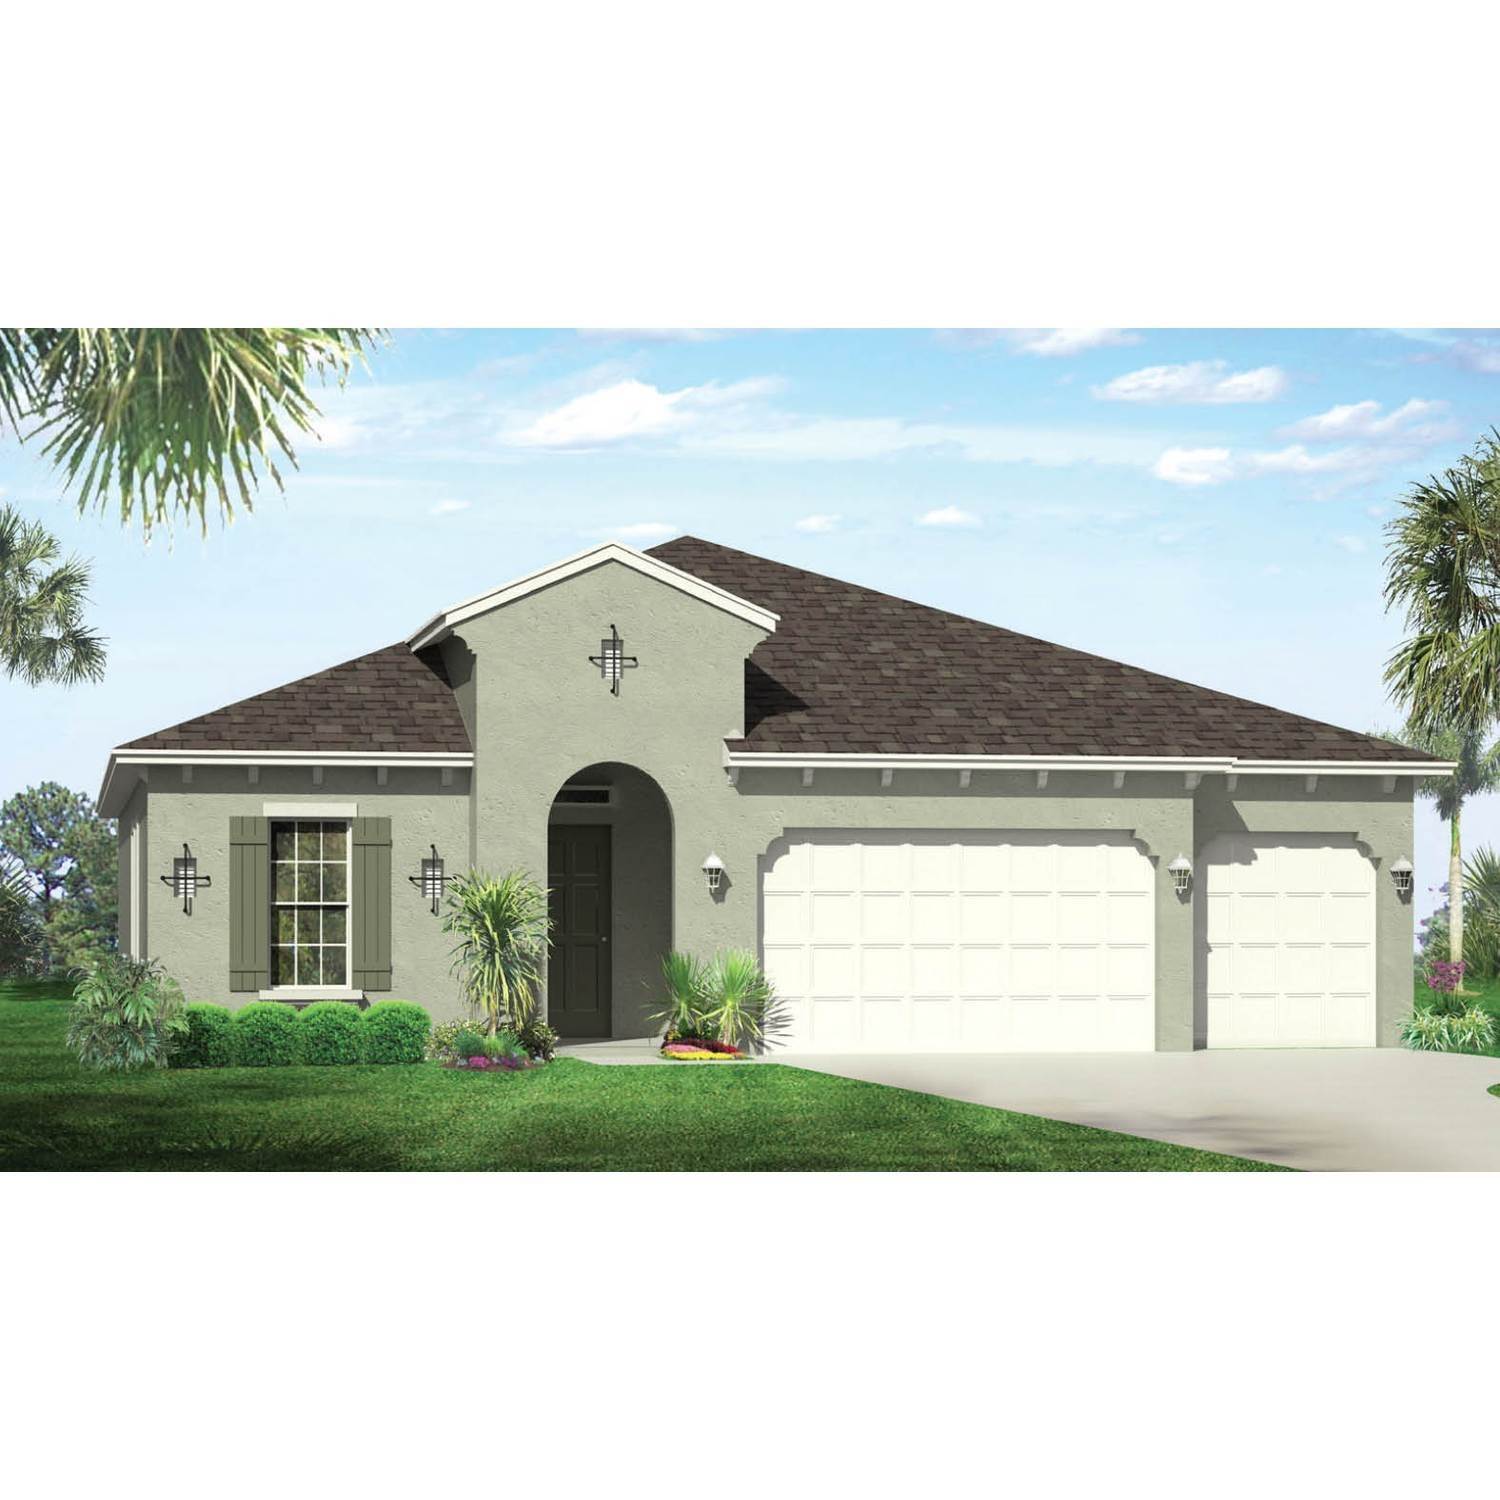 Single Family for Sale at Brightwater - Wheaton - D.R. Horton 18128 Everson Miles Circle NORTH FORT MYERS, FLORIDA 33917 UNITED STATES